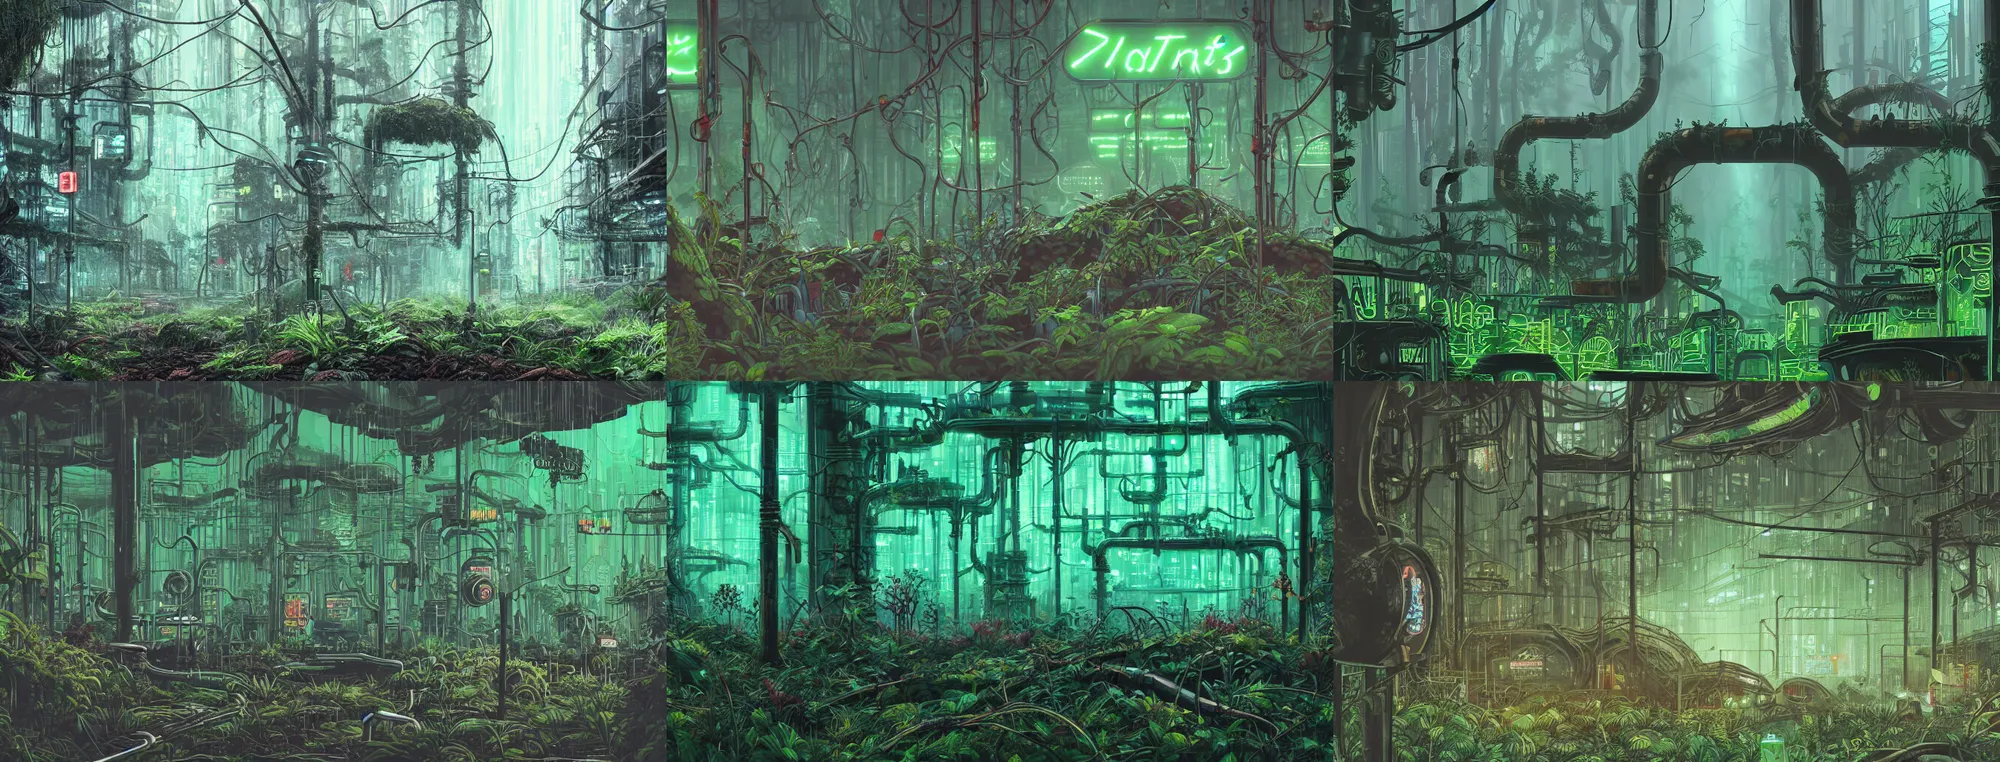 Prompt: plants growing out of old rusty pipes in a primeval forest, green neon signs, ground covered in mist, detailed cyberpunk illustration